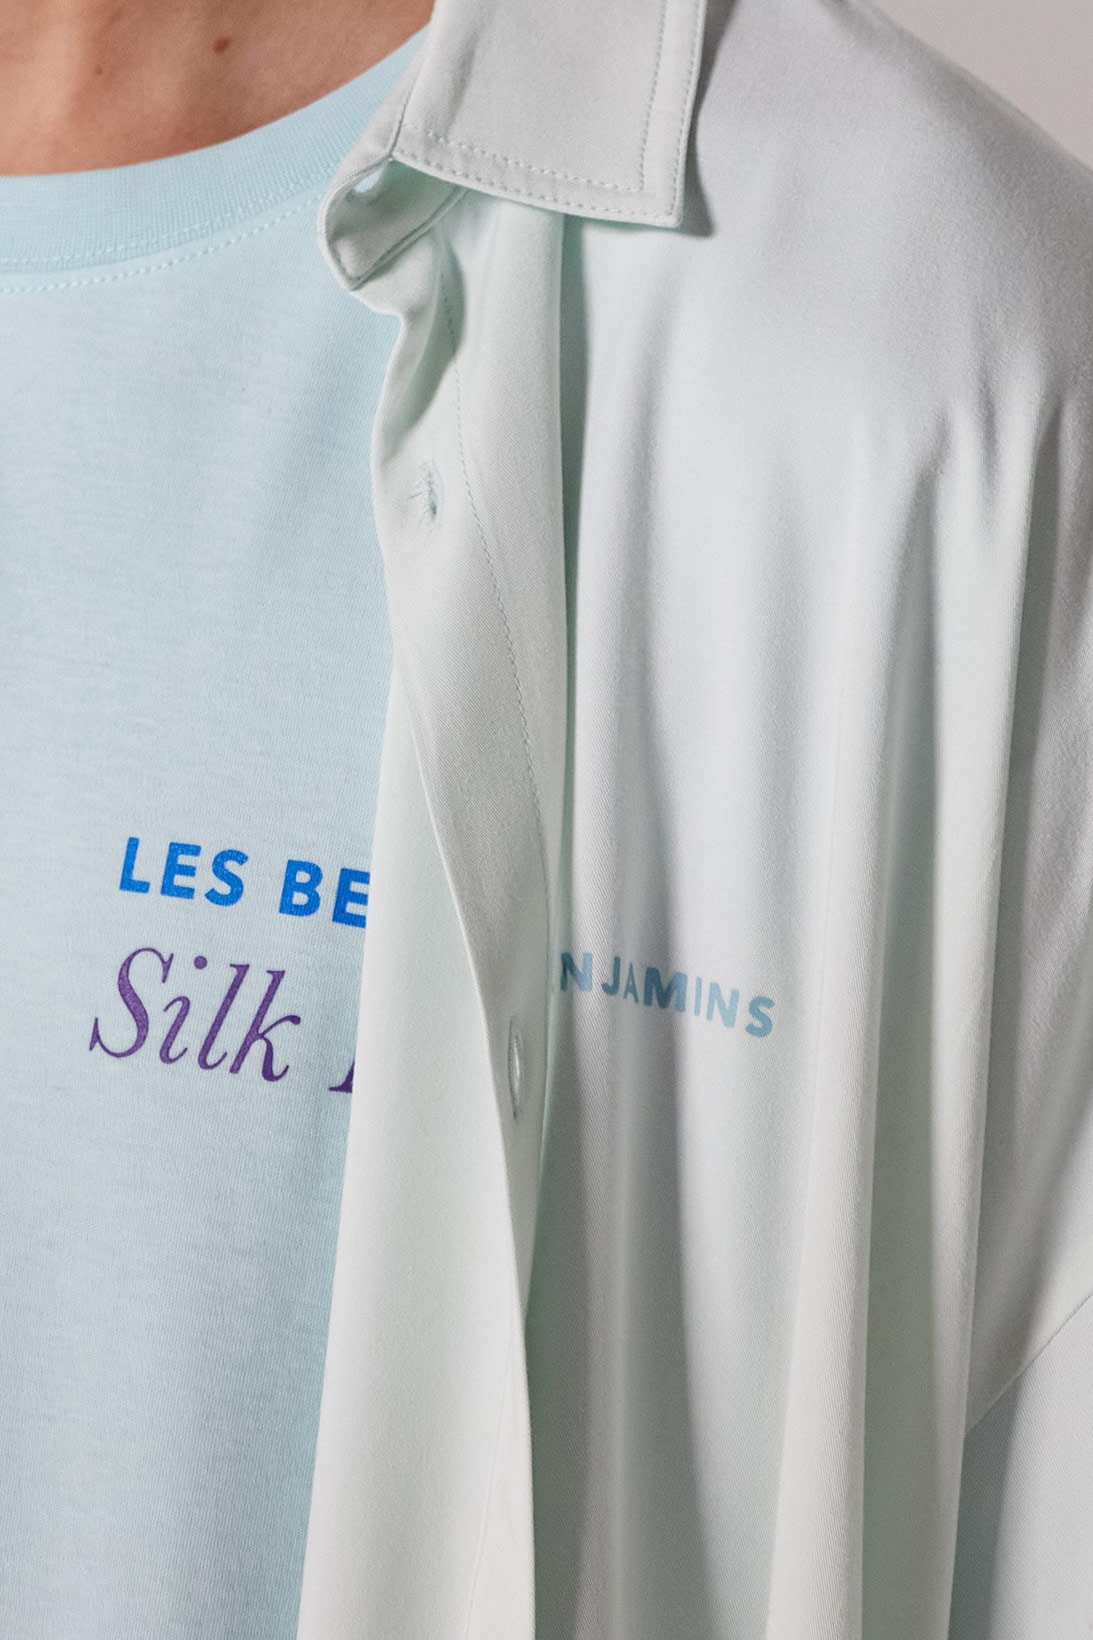 les benjamins silk road services spring summer collection campaign shirt tee